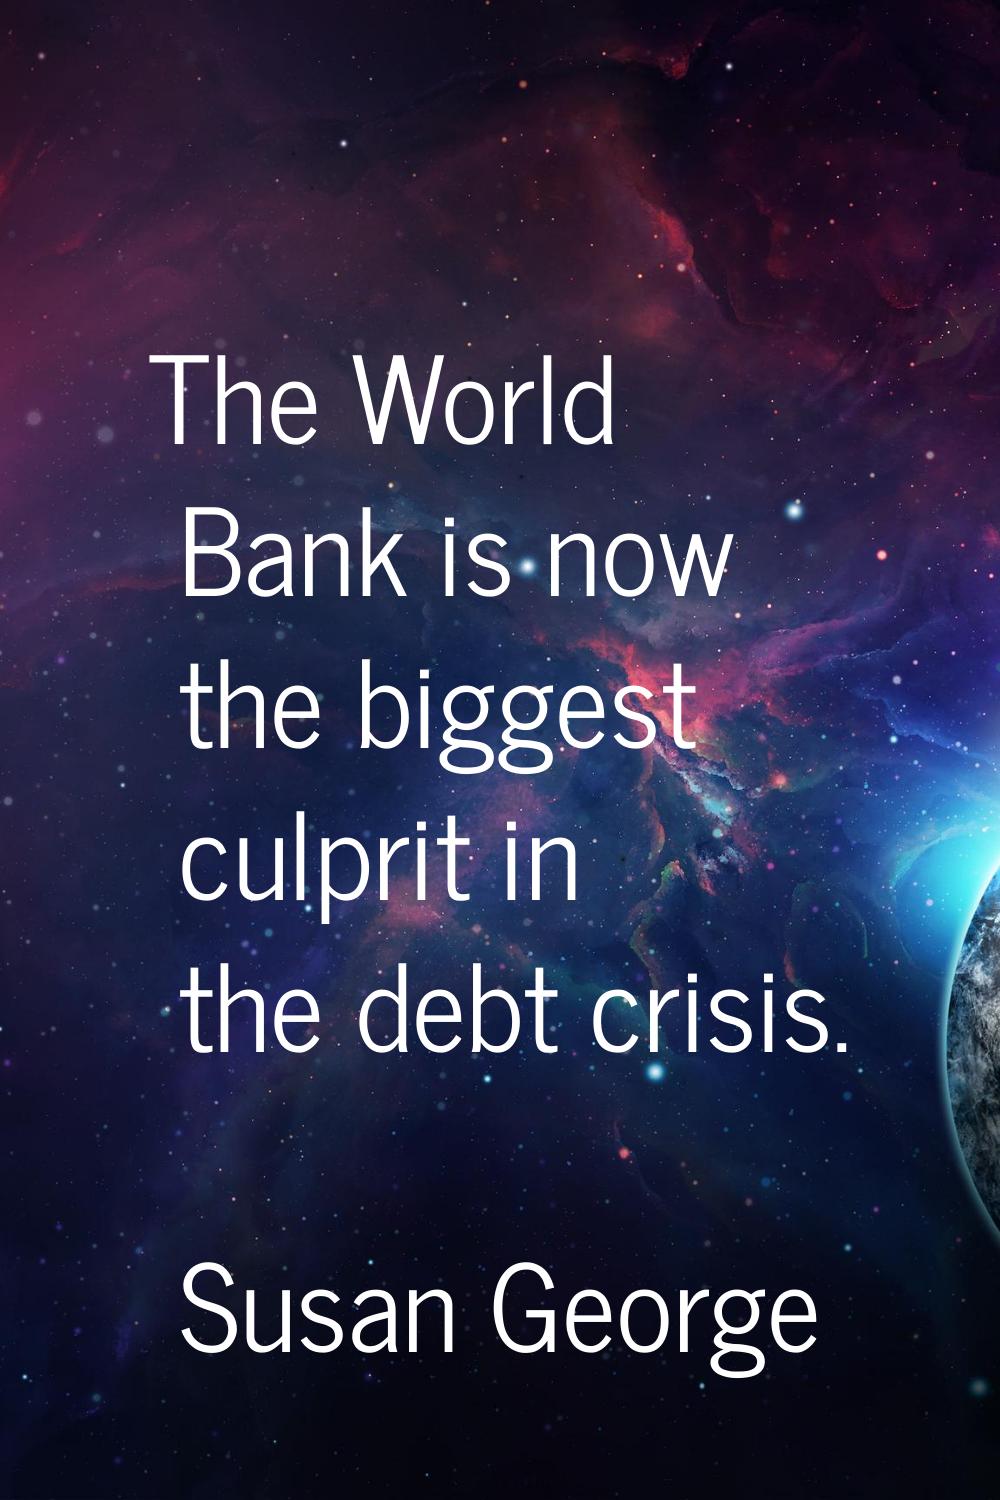 The World Bank is now the biggest culprit in the debt crisis.